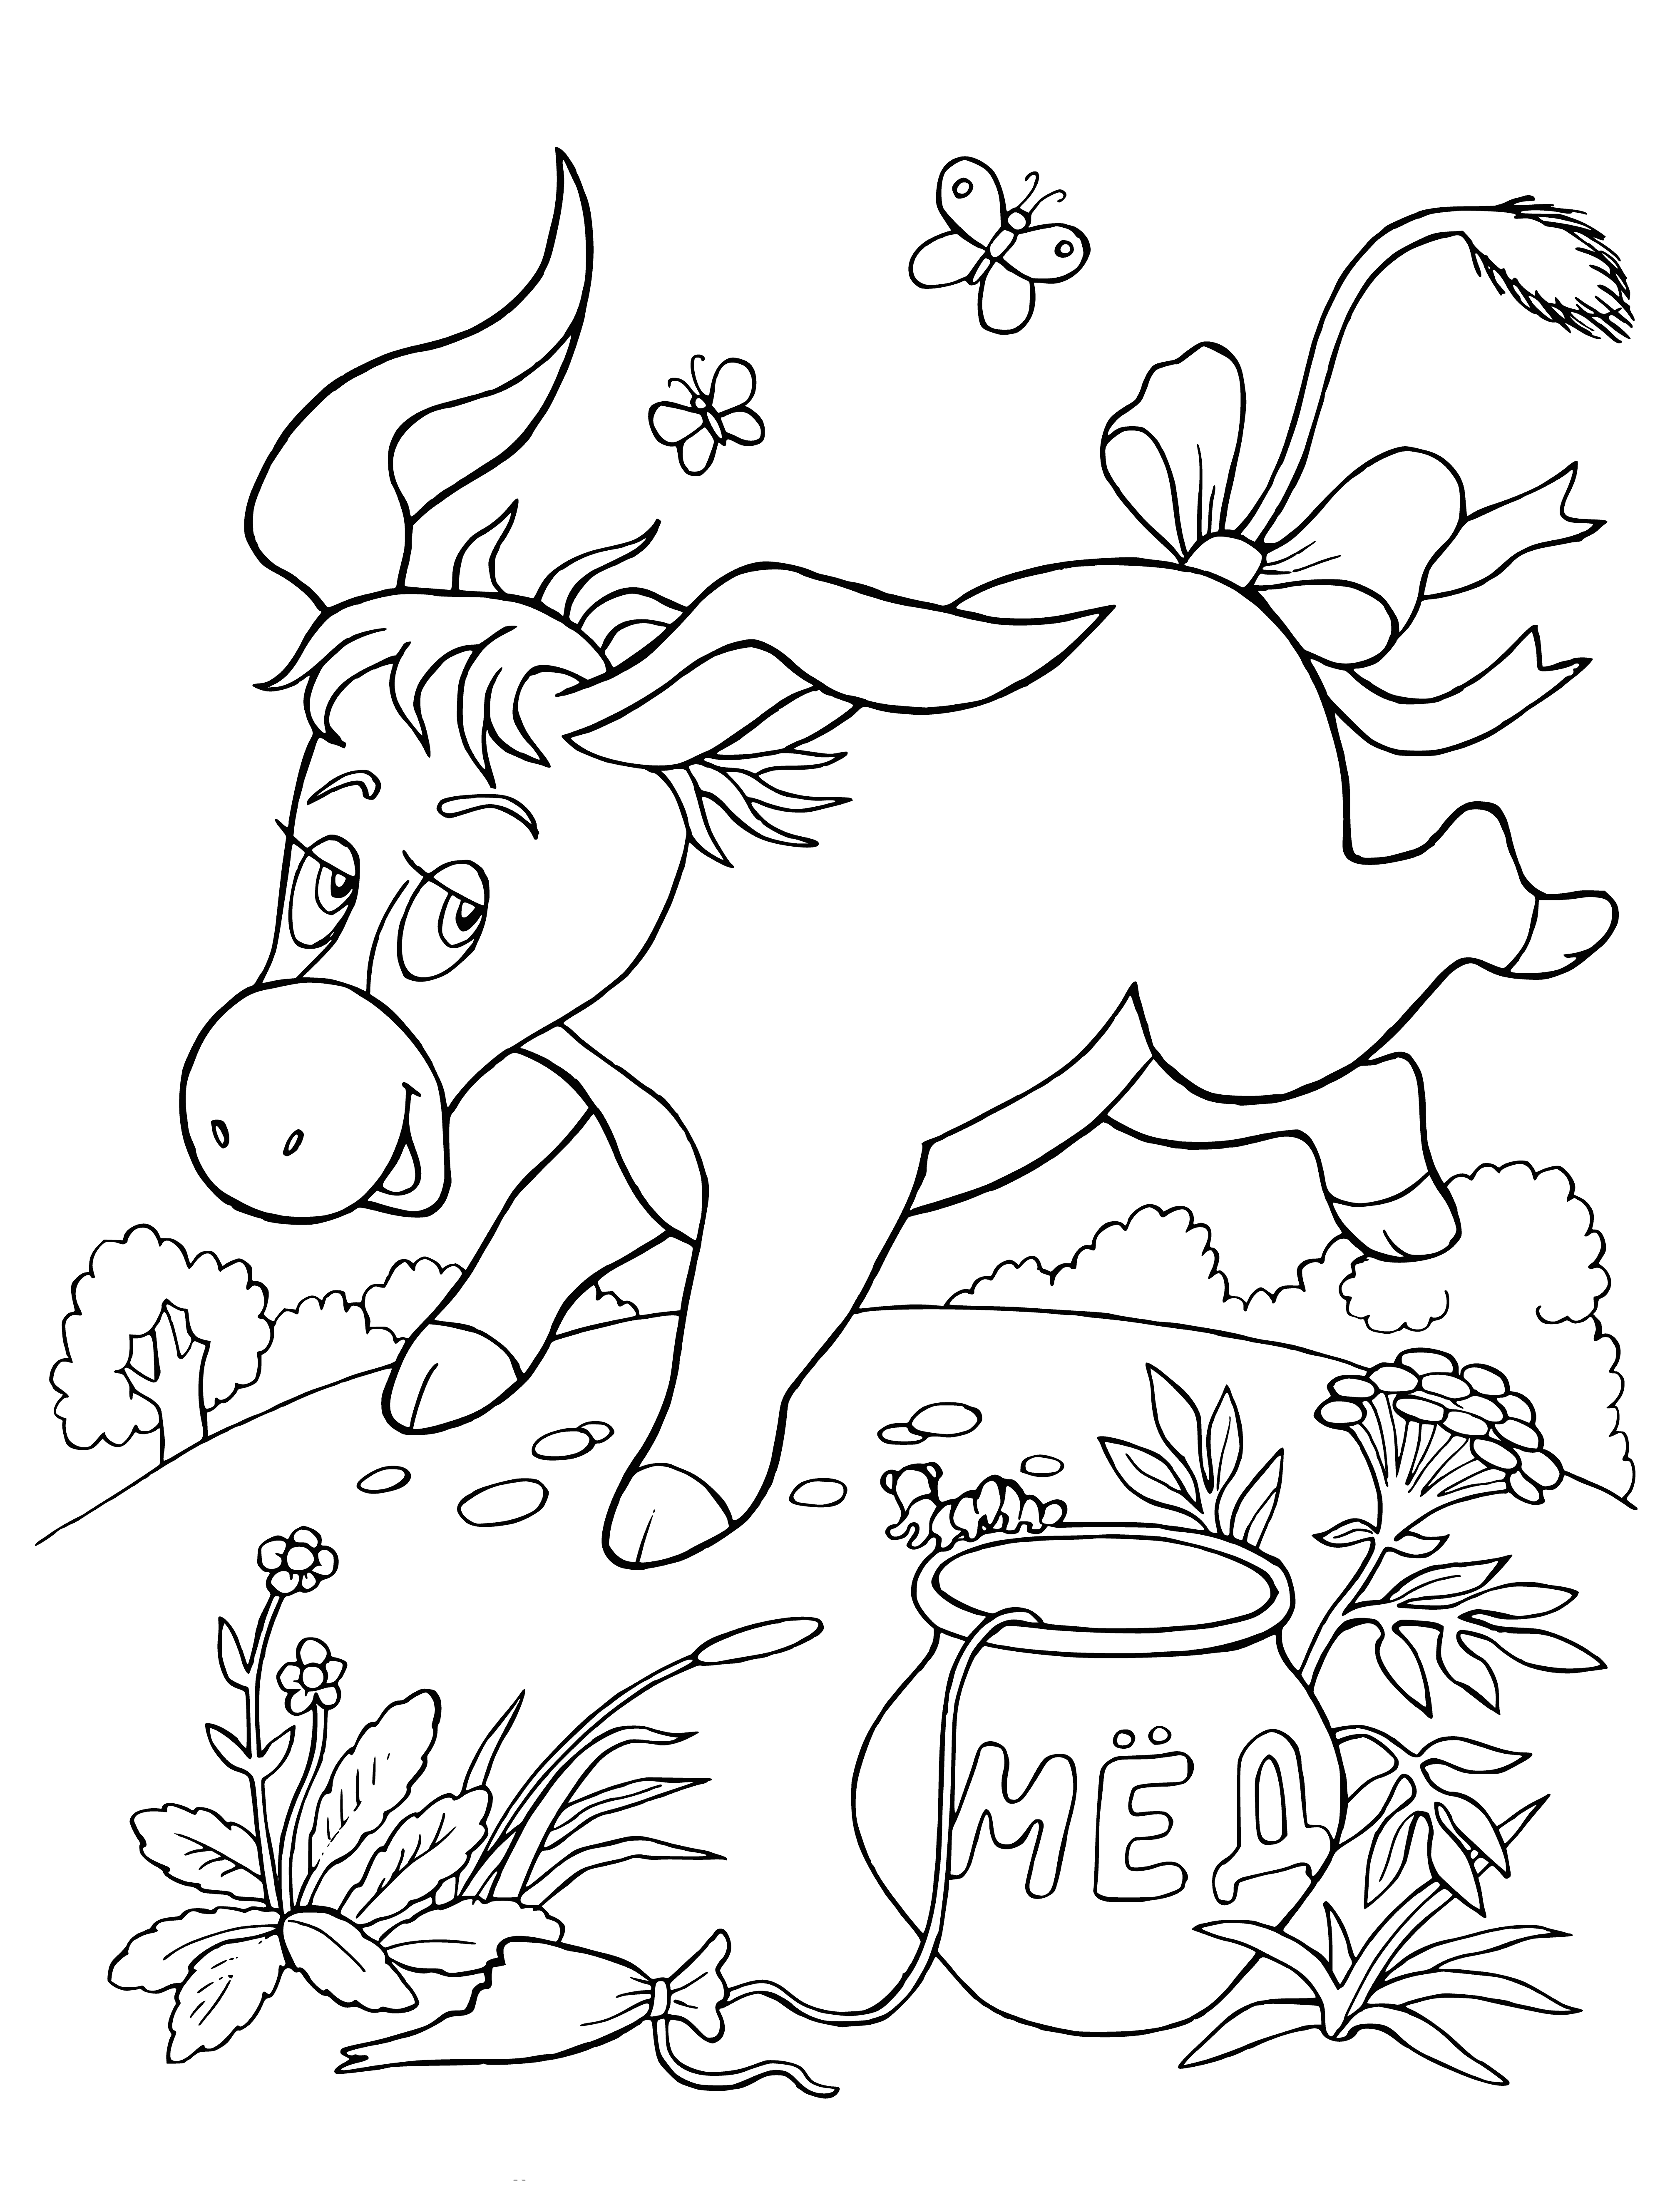 coloring page: Winnie & Donkey in a field of grass, looking at something in the distance. Pooh pondering, Donkey alert. #PoohandDonkey #CartoonMagic